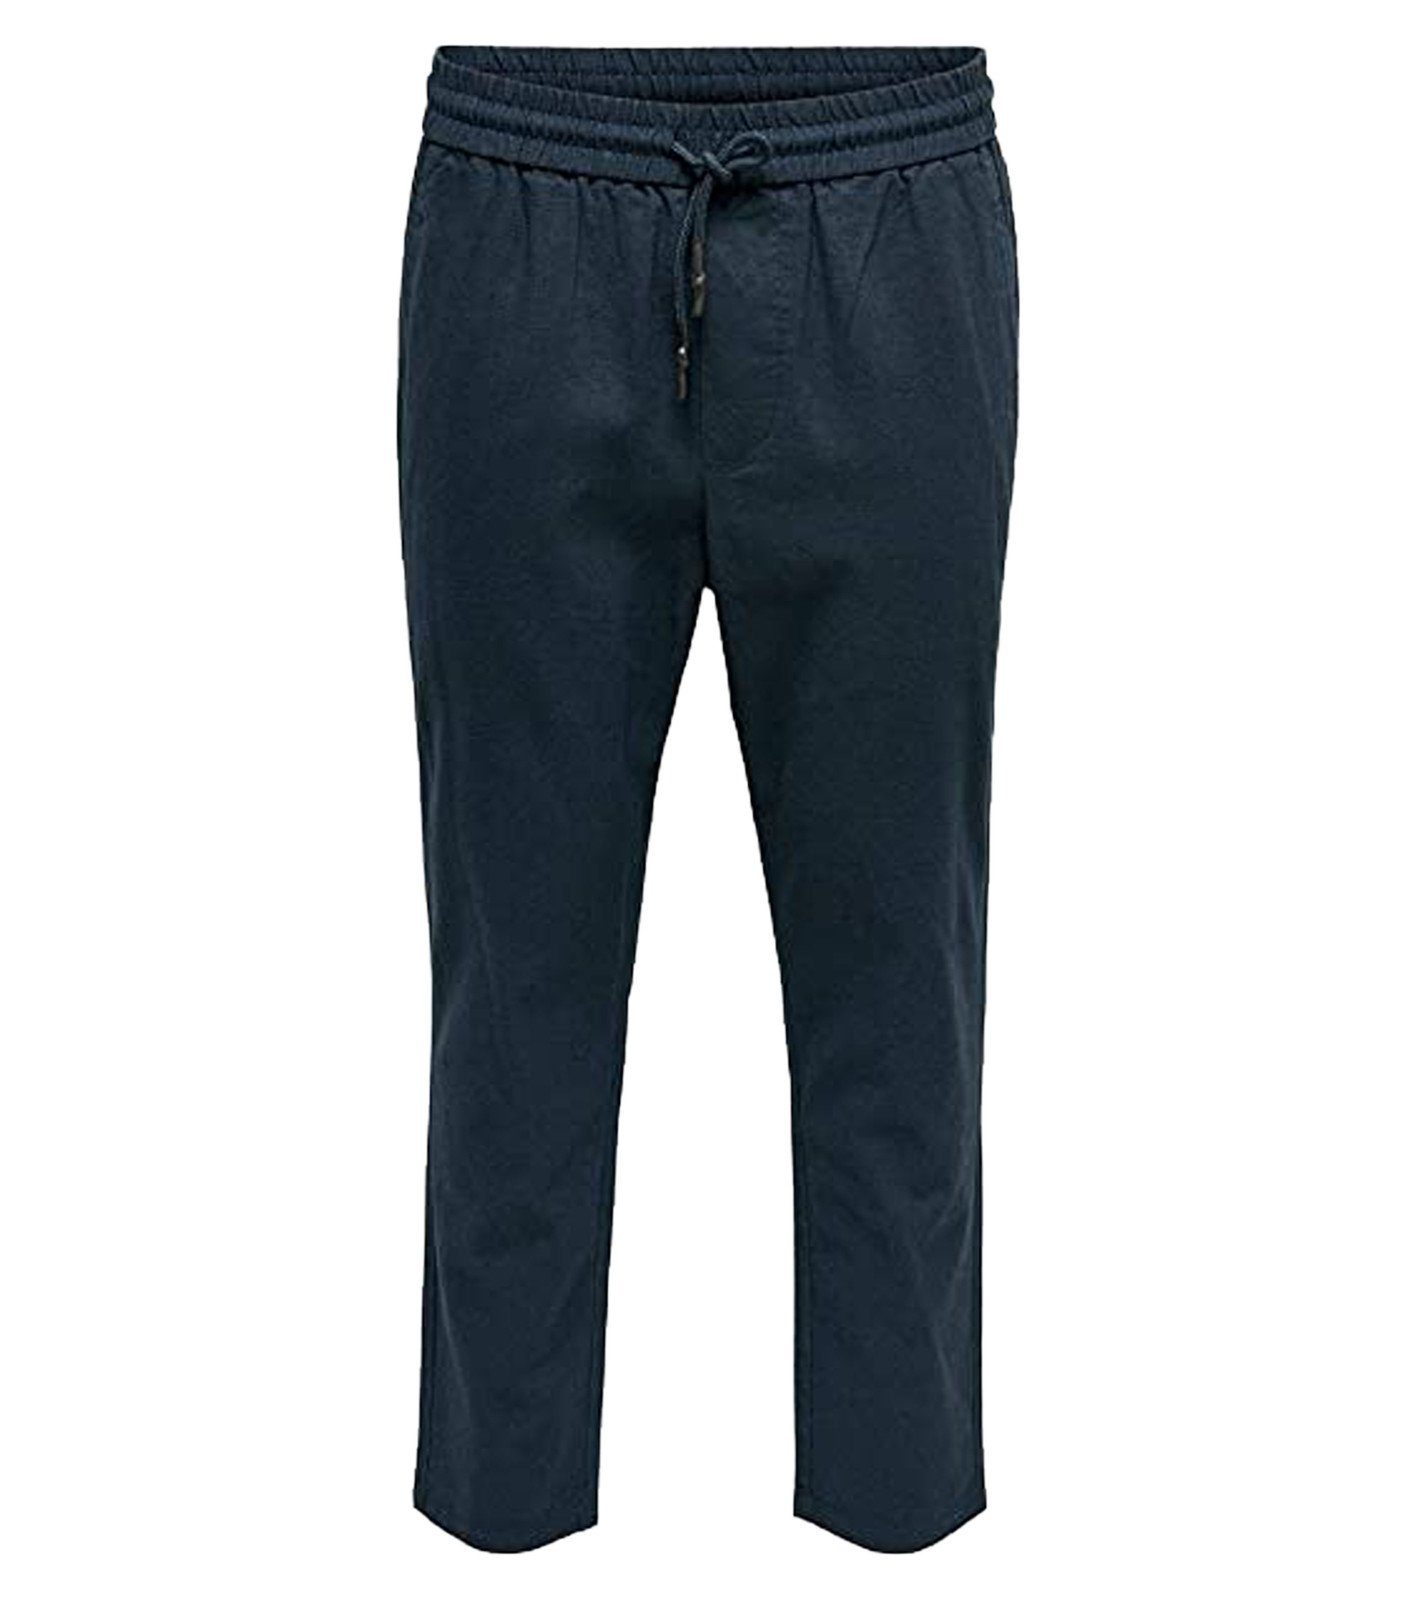 ONLY & SONS Stoffhose »ONLY & SONS Herren Chino-Hose Business-Hose Linus  Crop Linen Mix Stoff-Hose Blau« online kaufen | OTTO